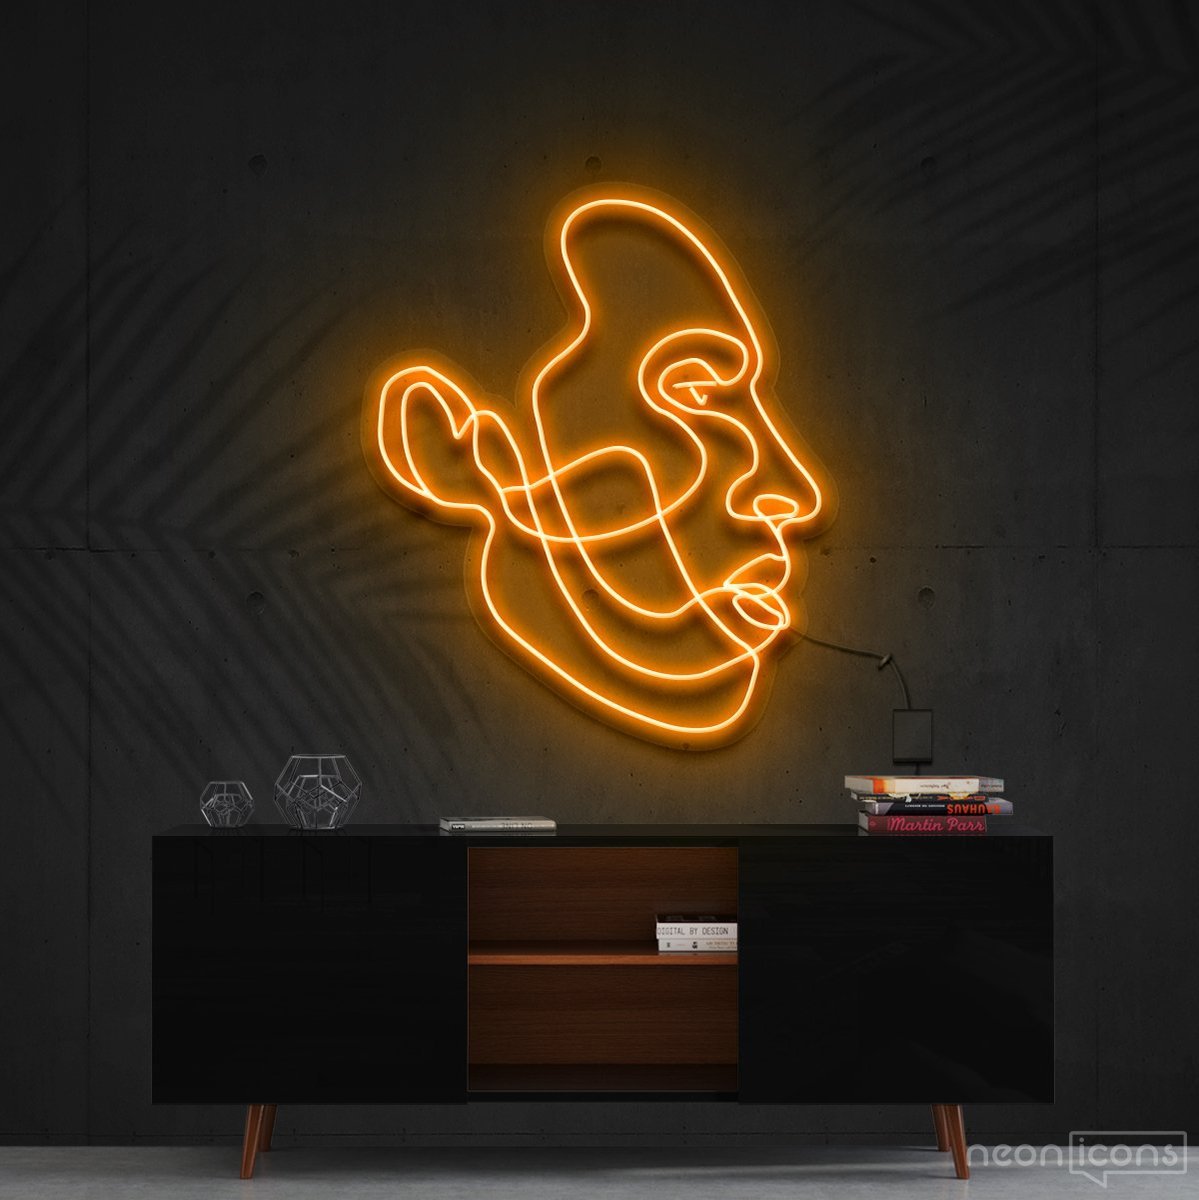 "Kobe Bryant" Neon Sign 60cm (2ft) / Orange / Cut to Shape by Neon Icons